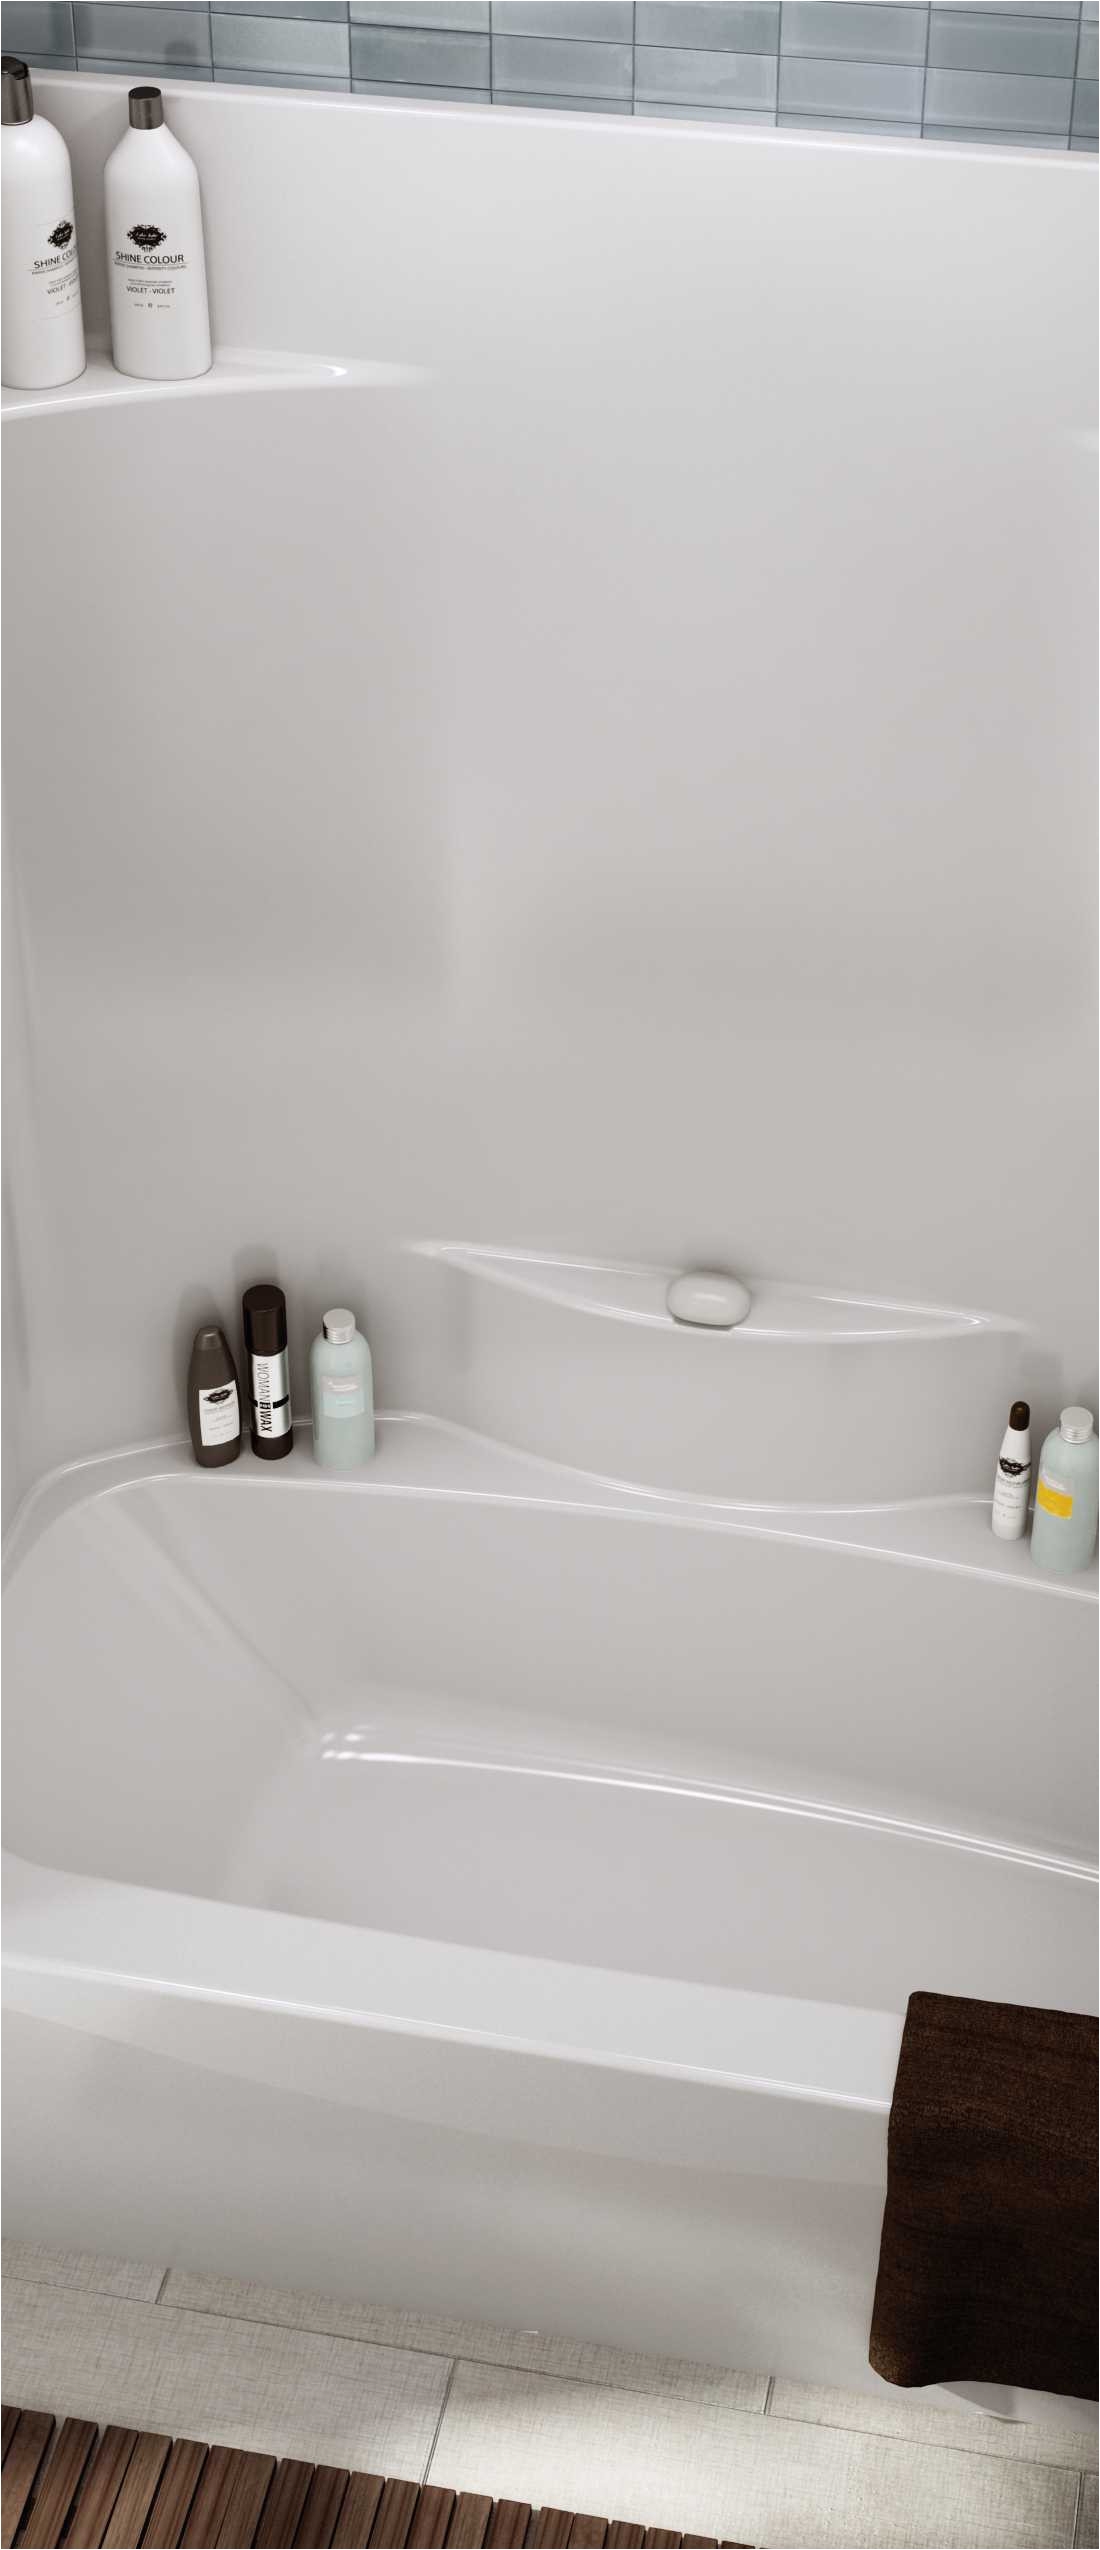 menards house plans and prices with unusual menards shower kits inspiration bathtub for